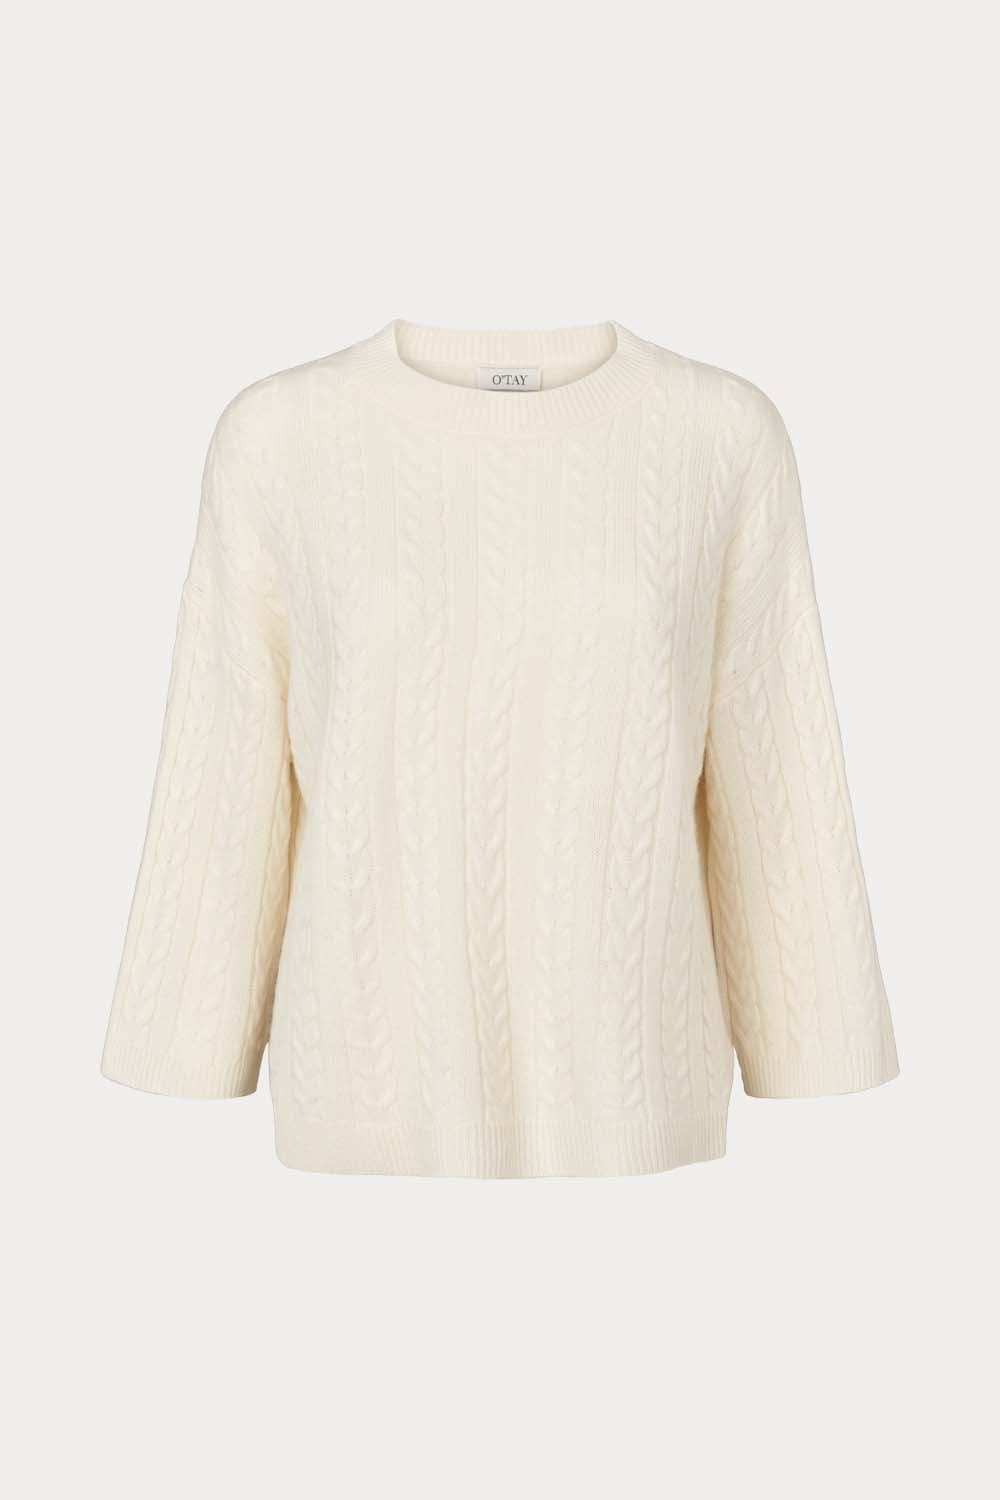 O'TAY Berry Sweater Bluser Off White